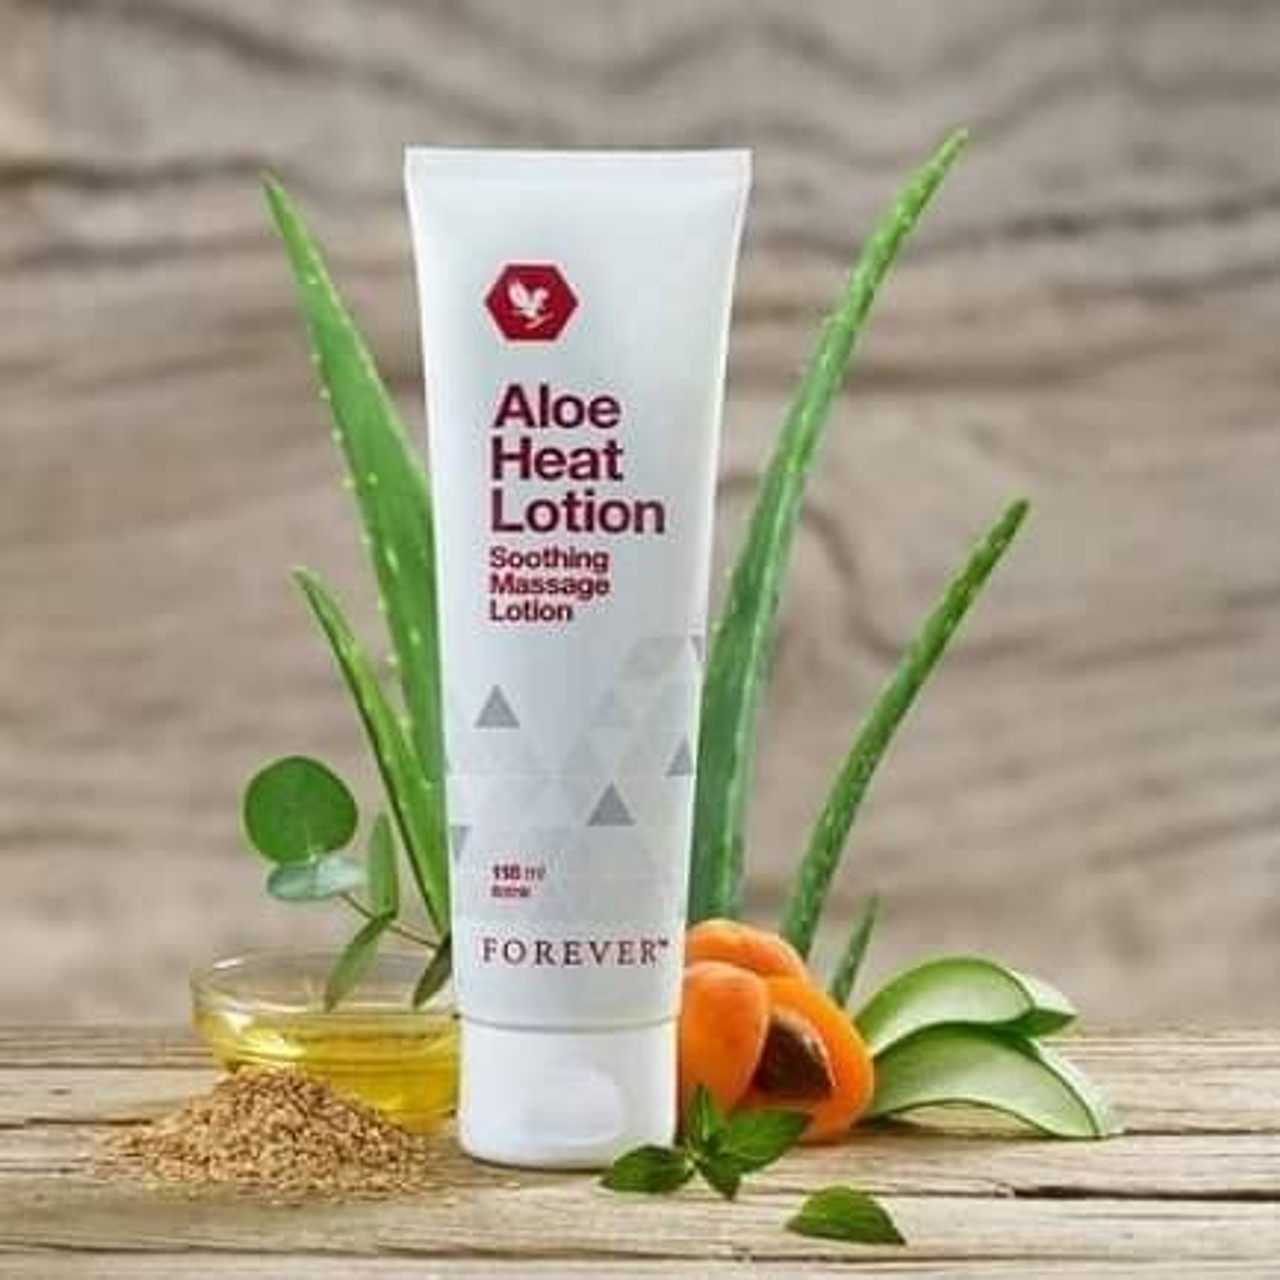 Forever Aloe Heat Lotion Soothing Warm Massage arm Foot Lotion Relaxing Scent Menthol Nourish